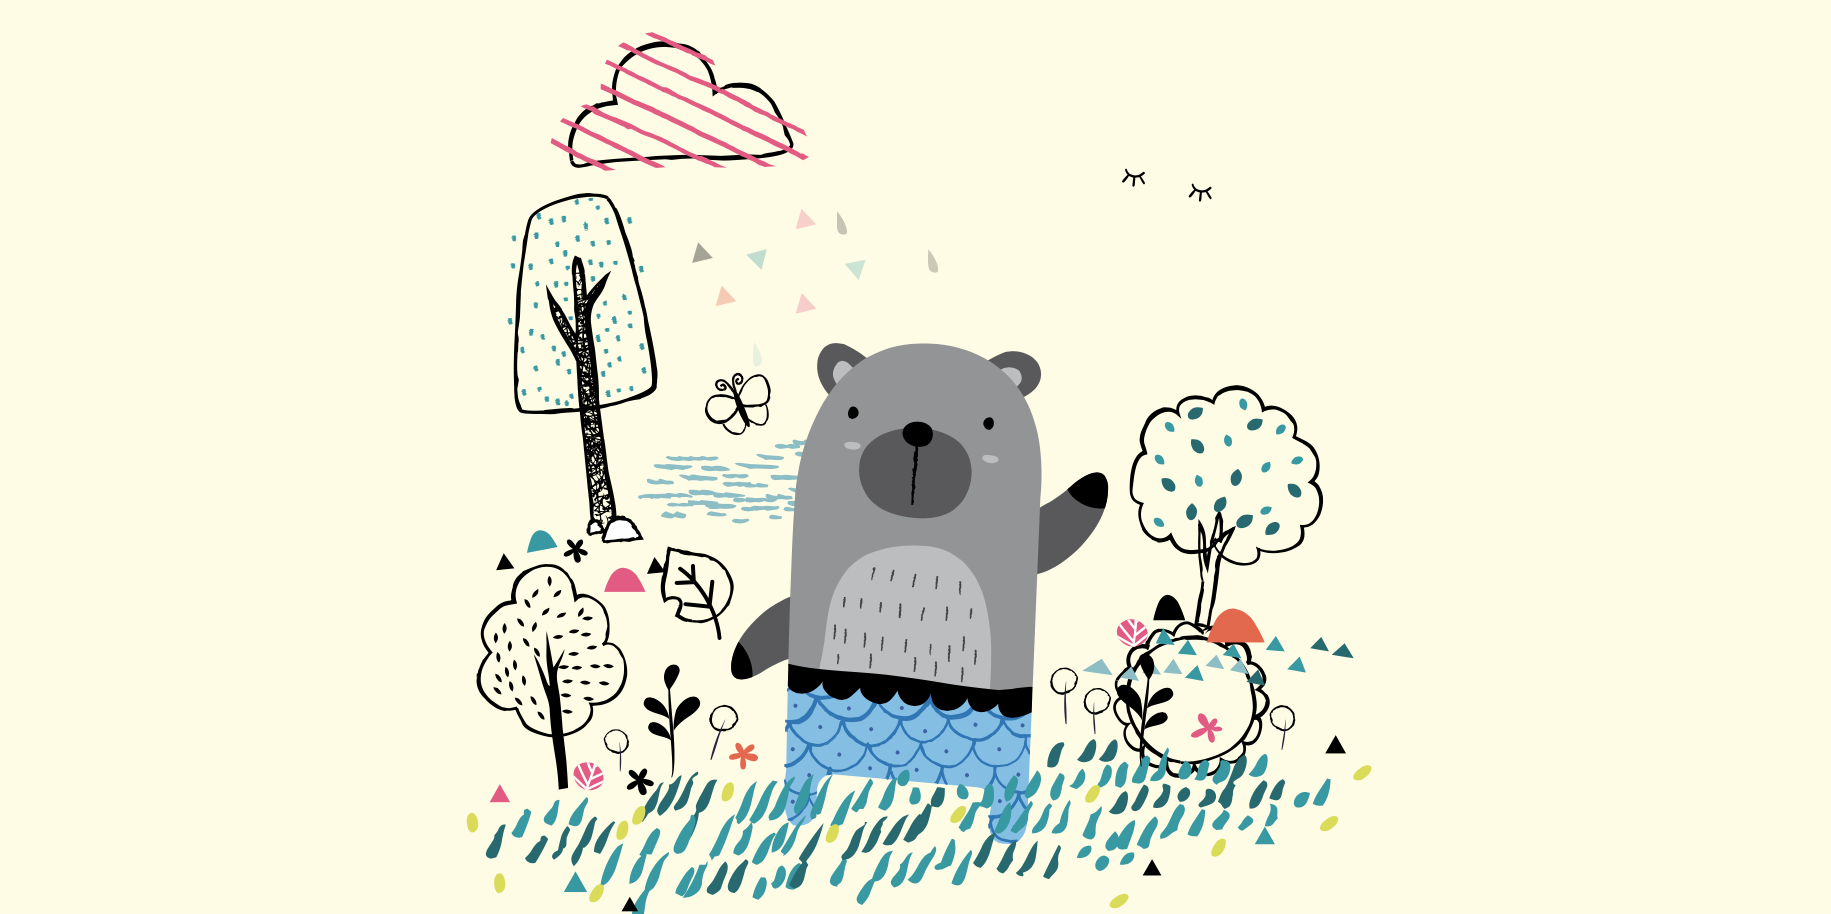 drawing of a bear in a garden by elsystudio, which Patrick Heng animated in CodePen